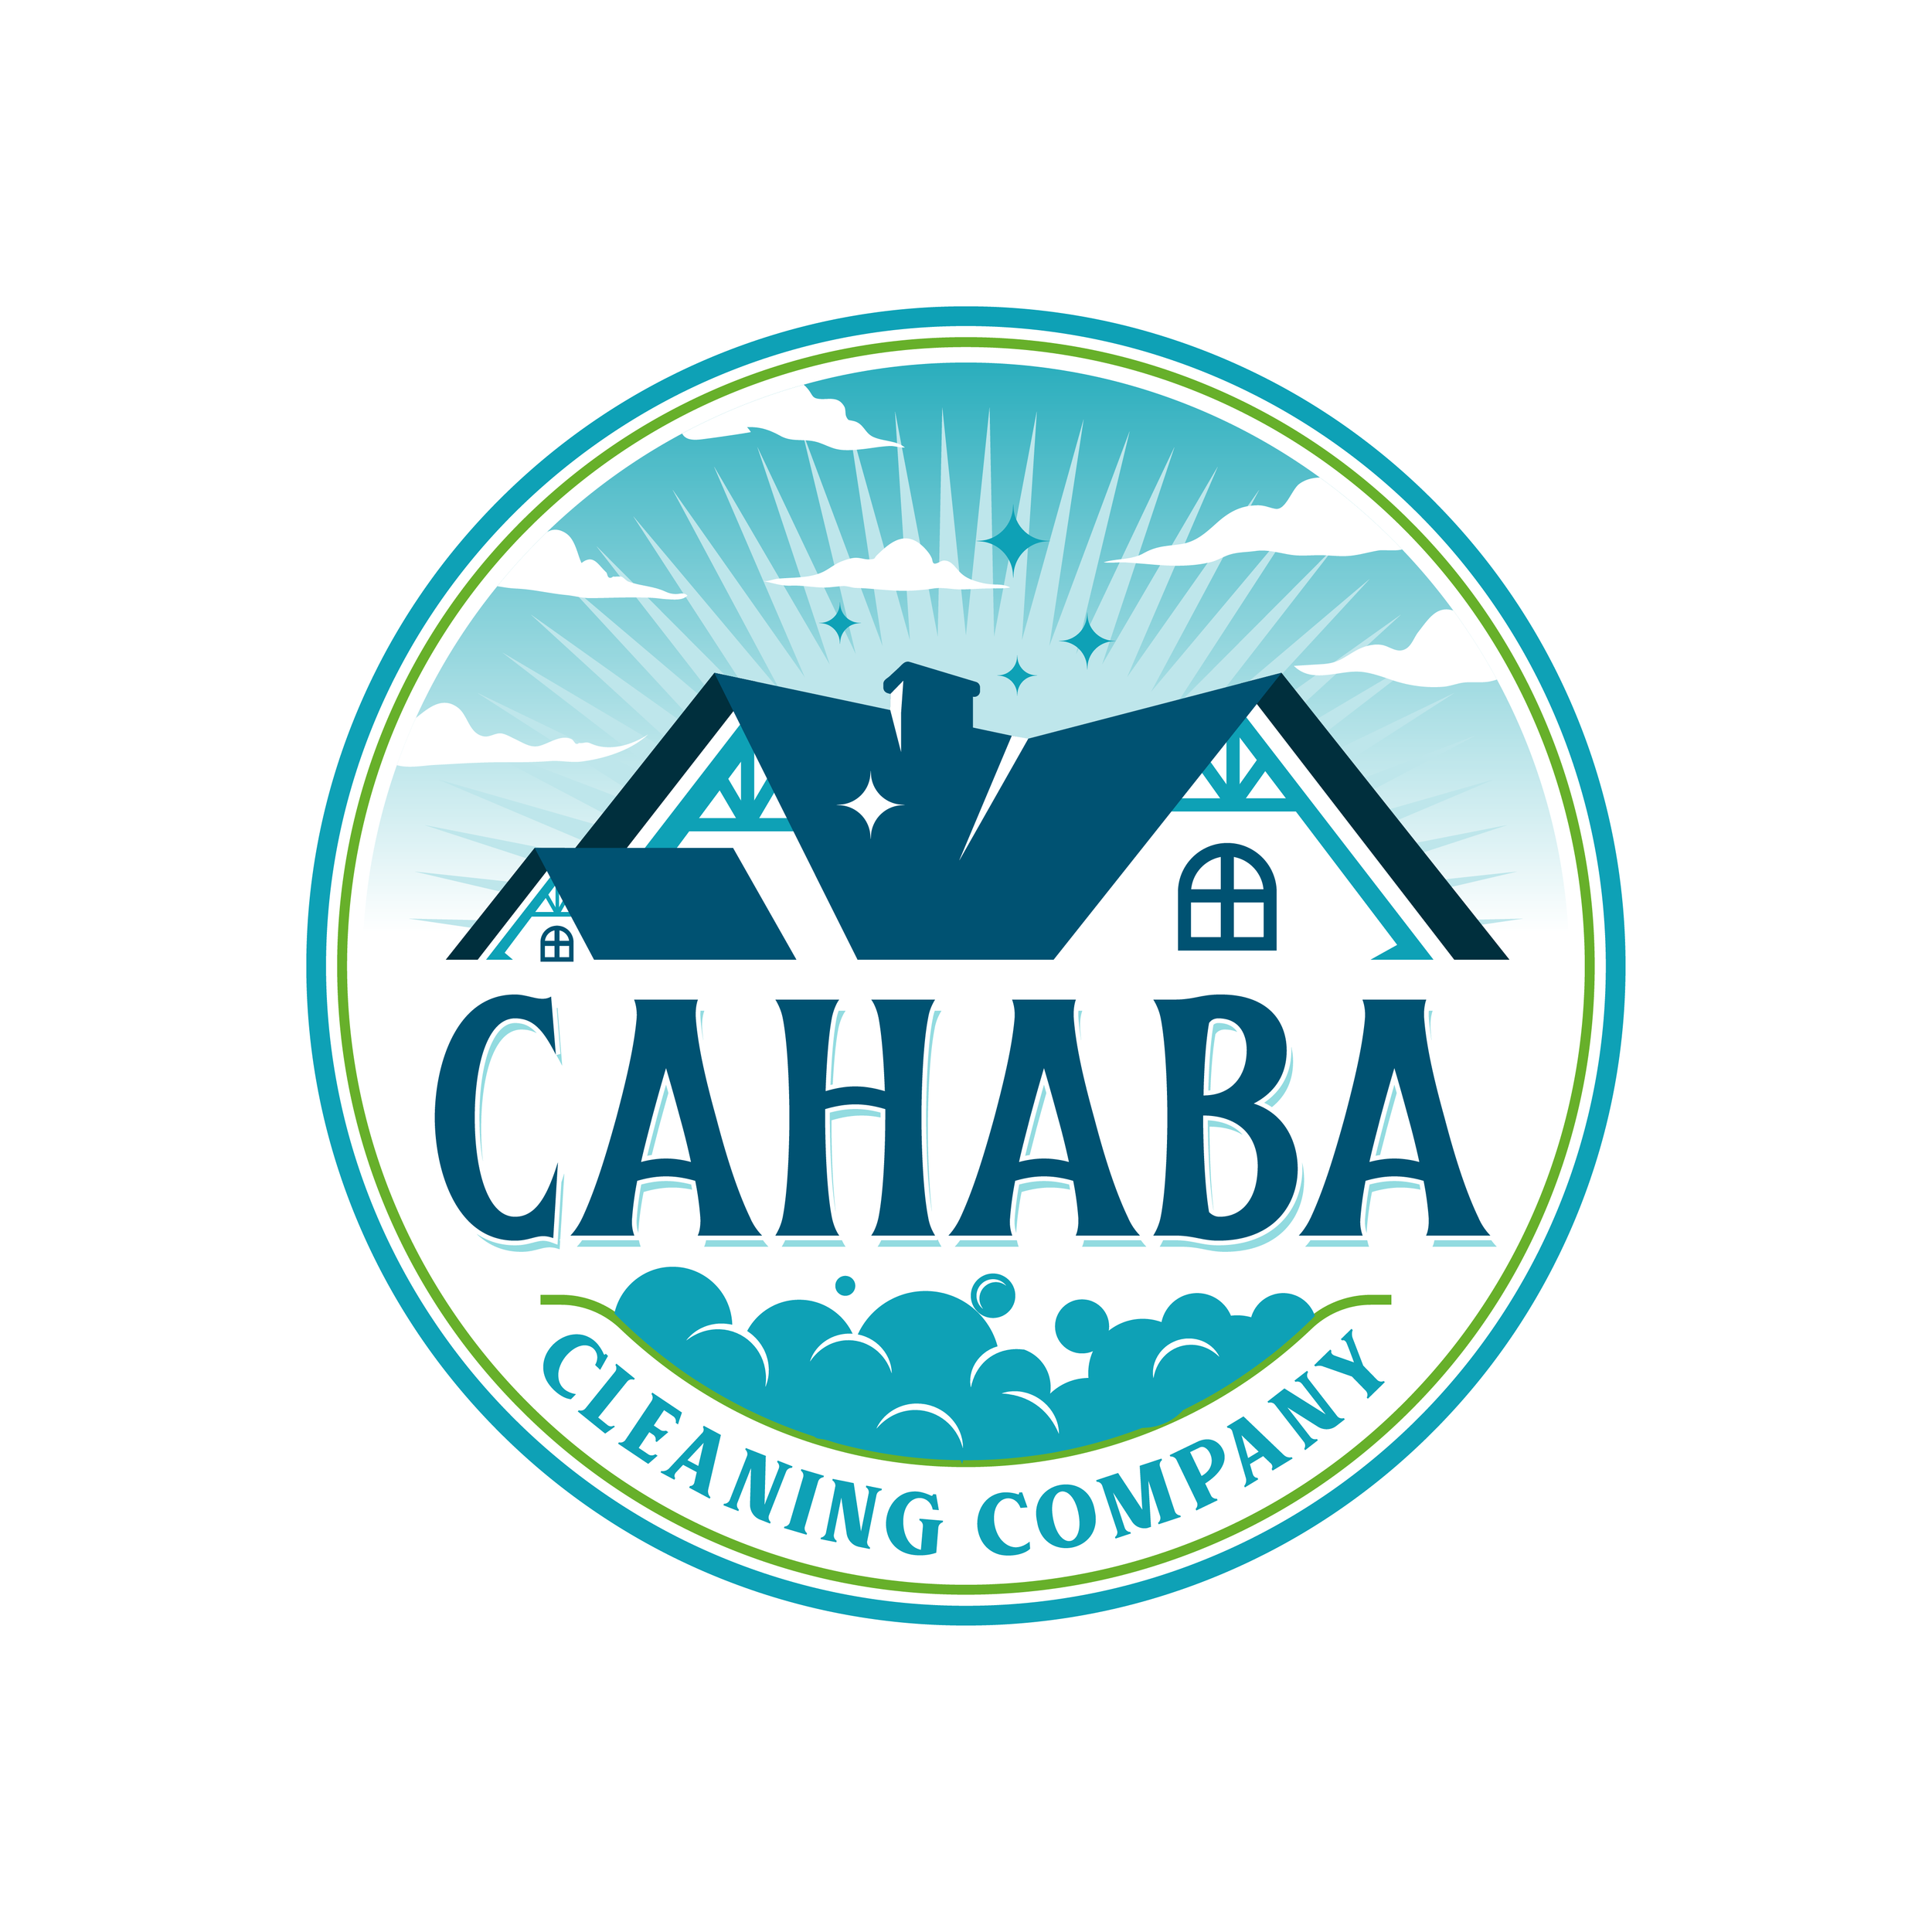 cahaba cleaning co logo.png